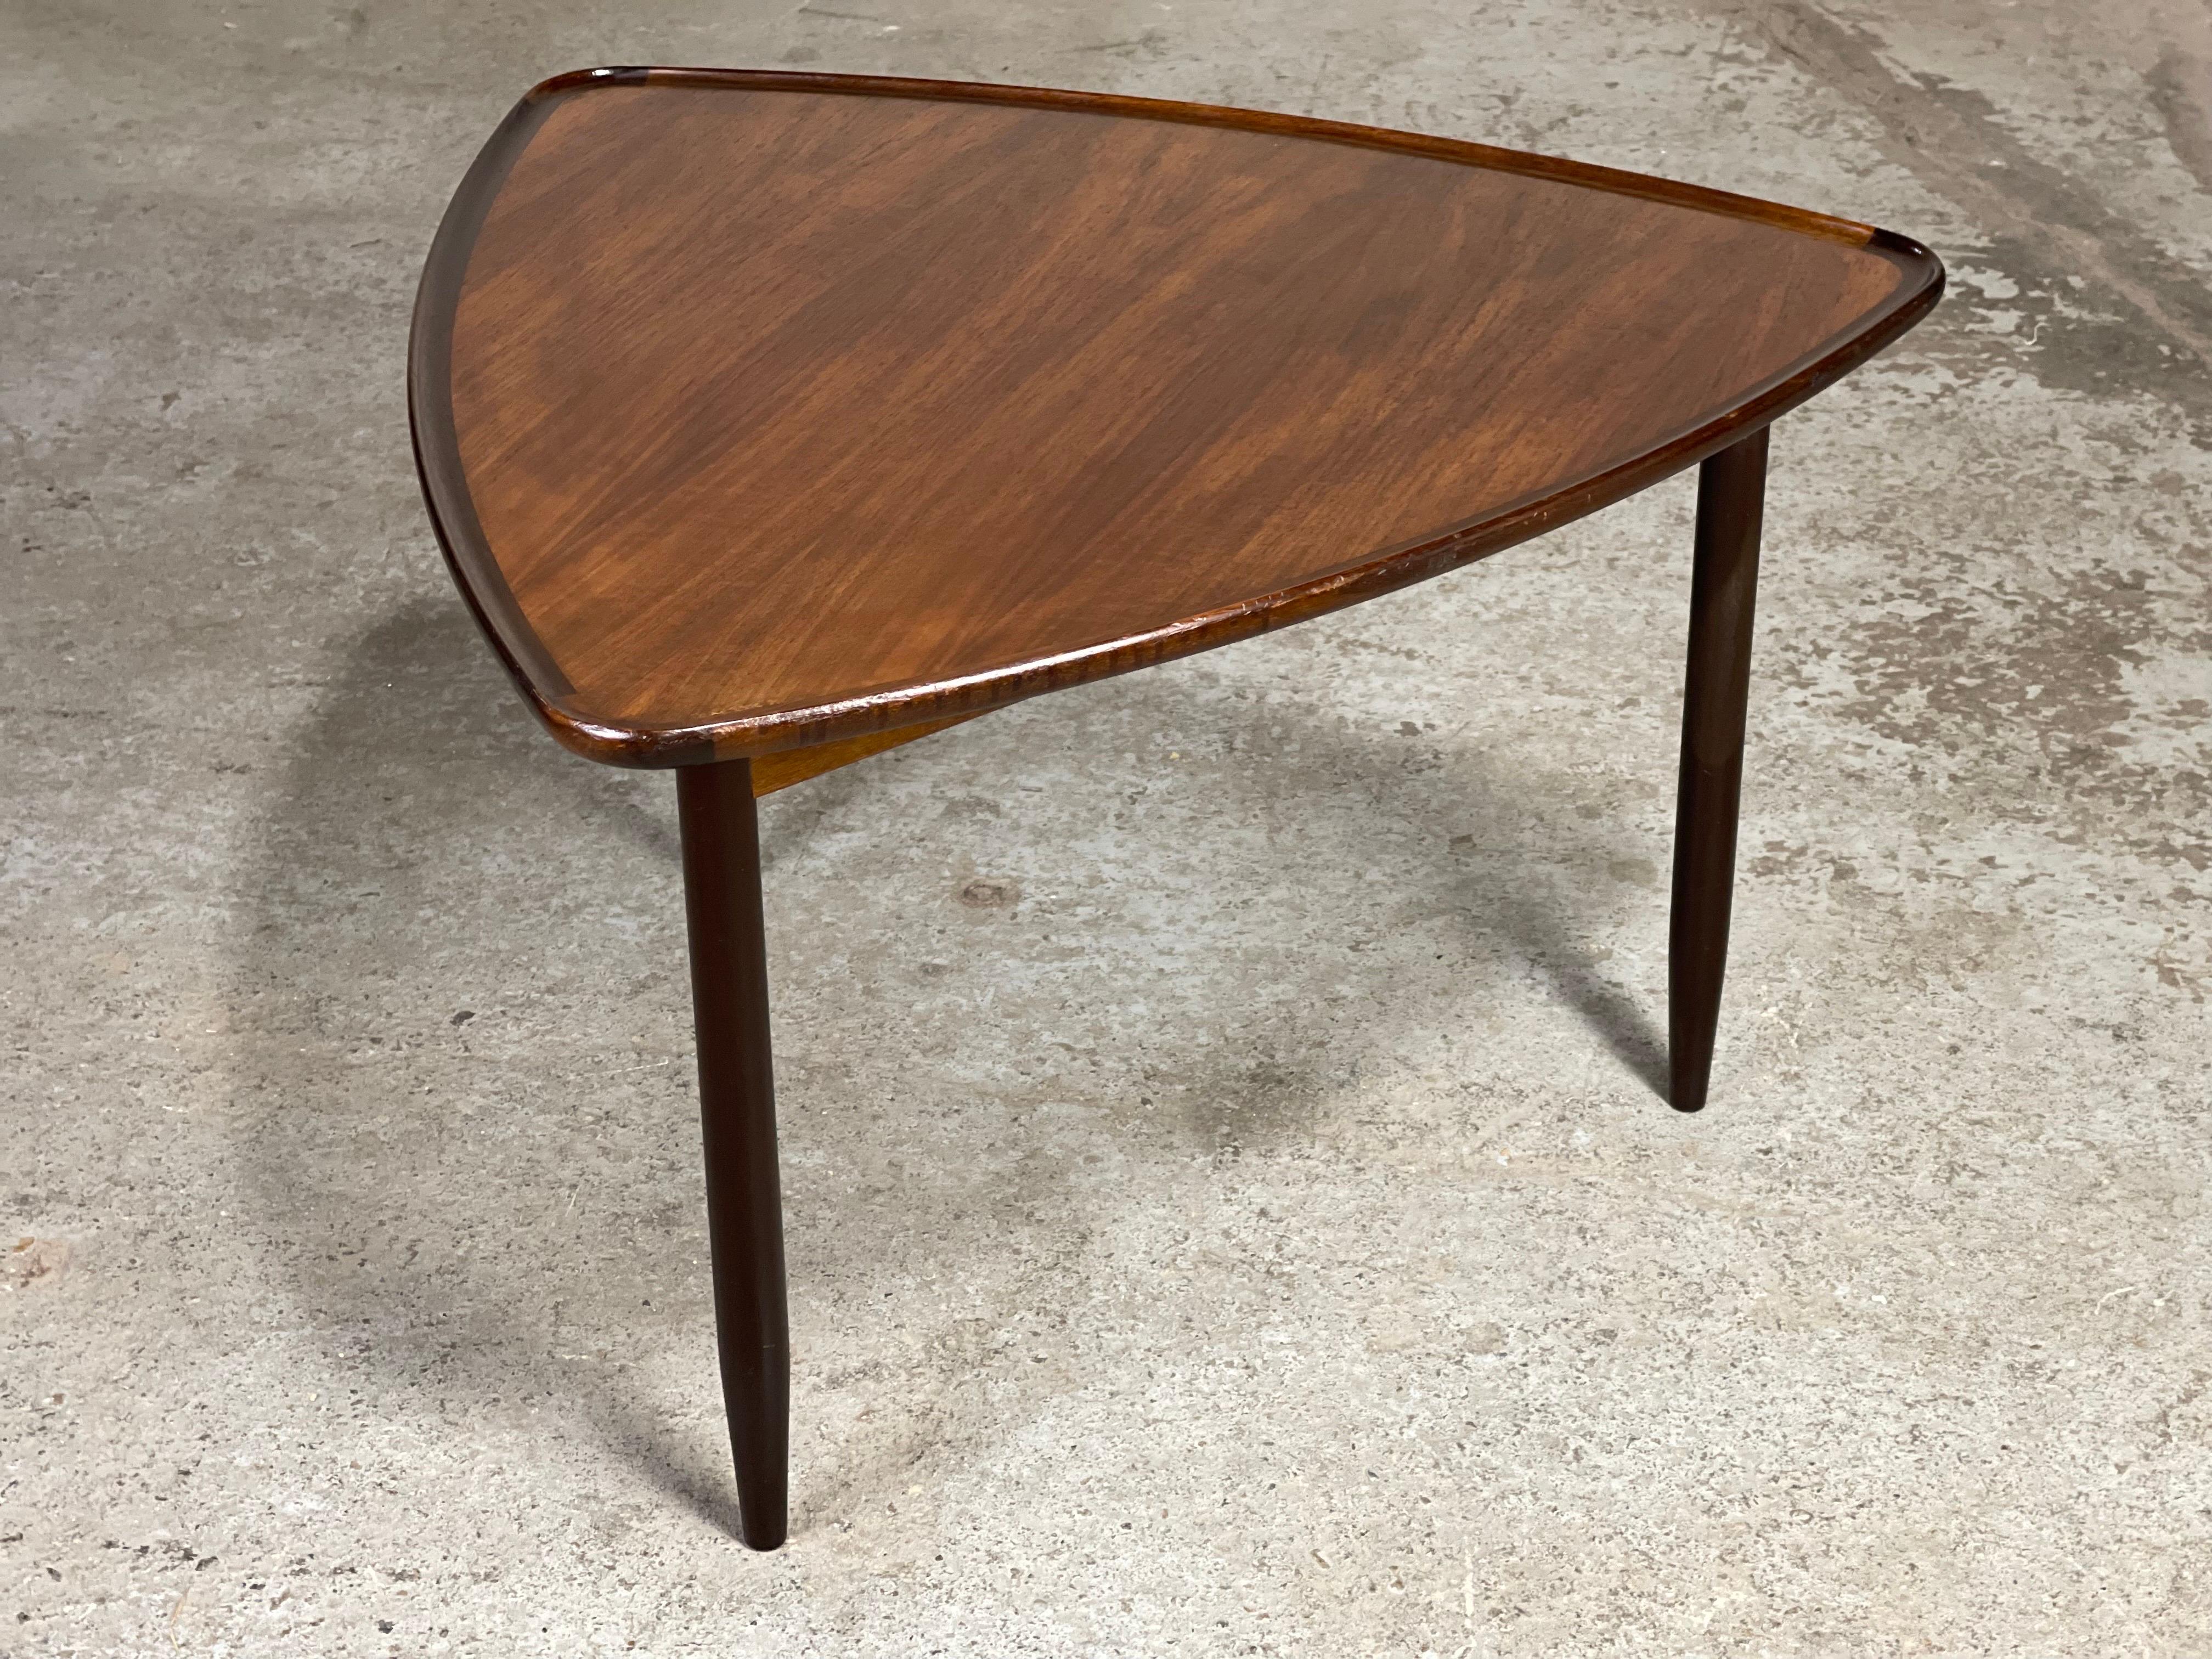 Patina Rich early 1950's mid century danish modern wedge table by Poul Jensen in oiled walnut. A very early example. Original condition. I can refinish the edges if you wish - no charge - I like to leave it up to the buyer. There is some normal edge